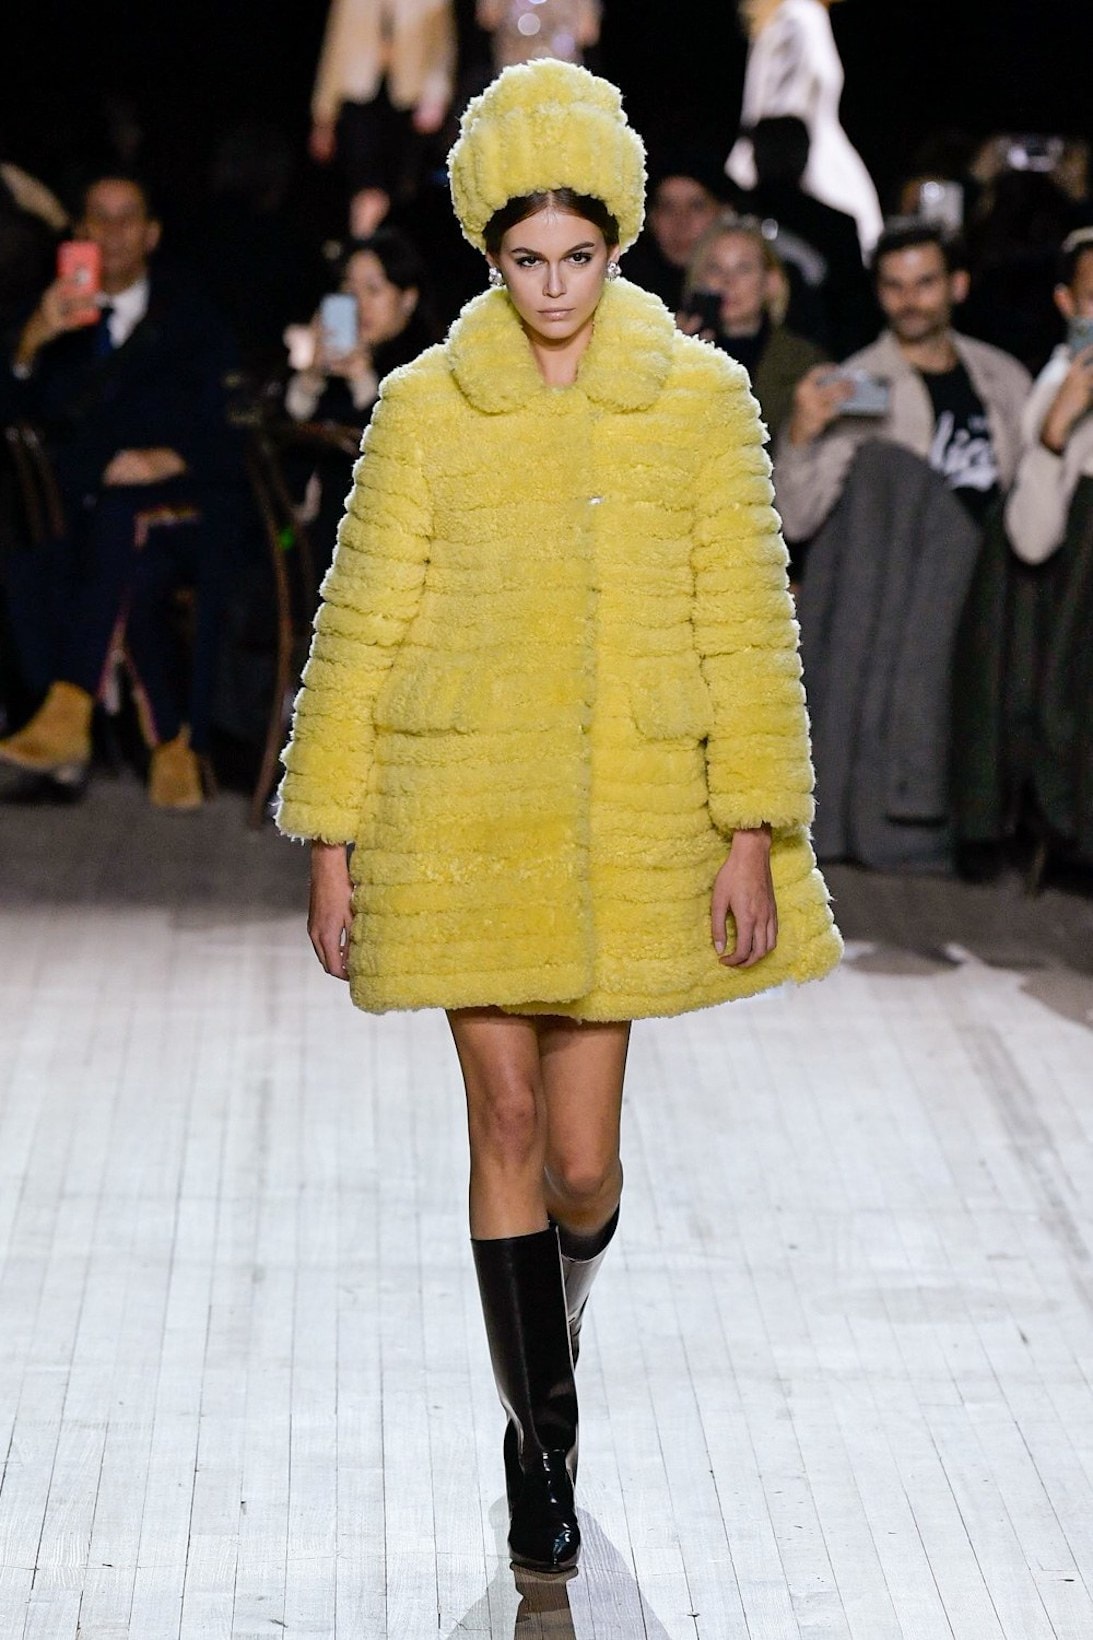 marc jacobs new york fashion week nyfw fall winter collection kaia gerber miley cyrus